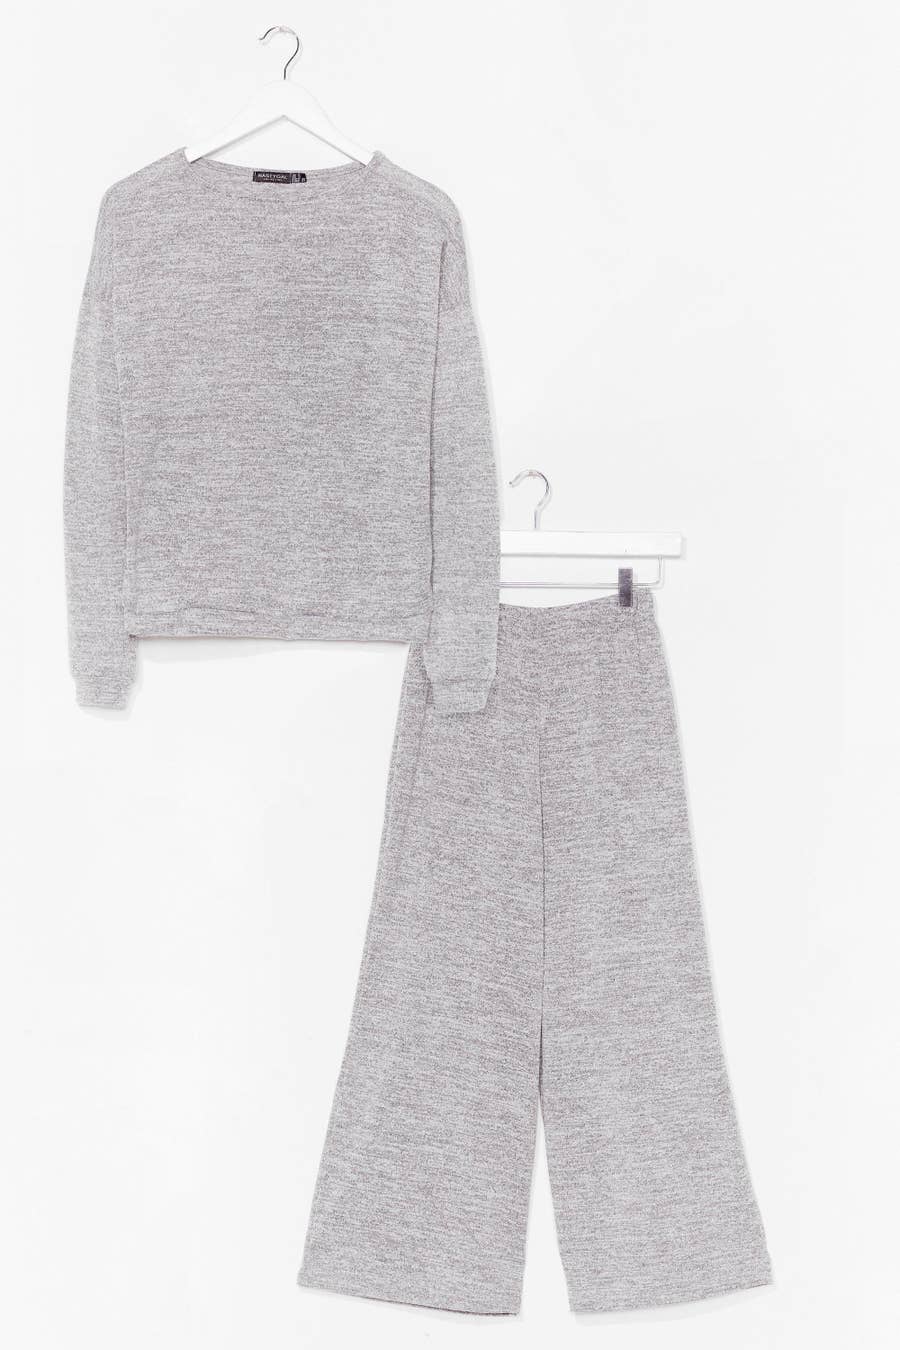 21 Sweat Sets That'll Make You Feel Comfy And Chic At The Same Time